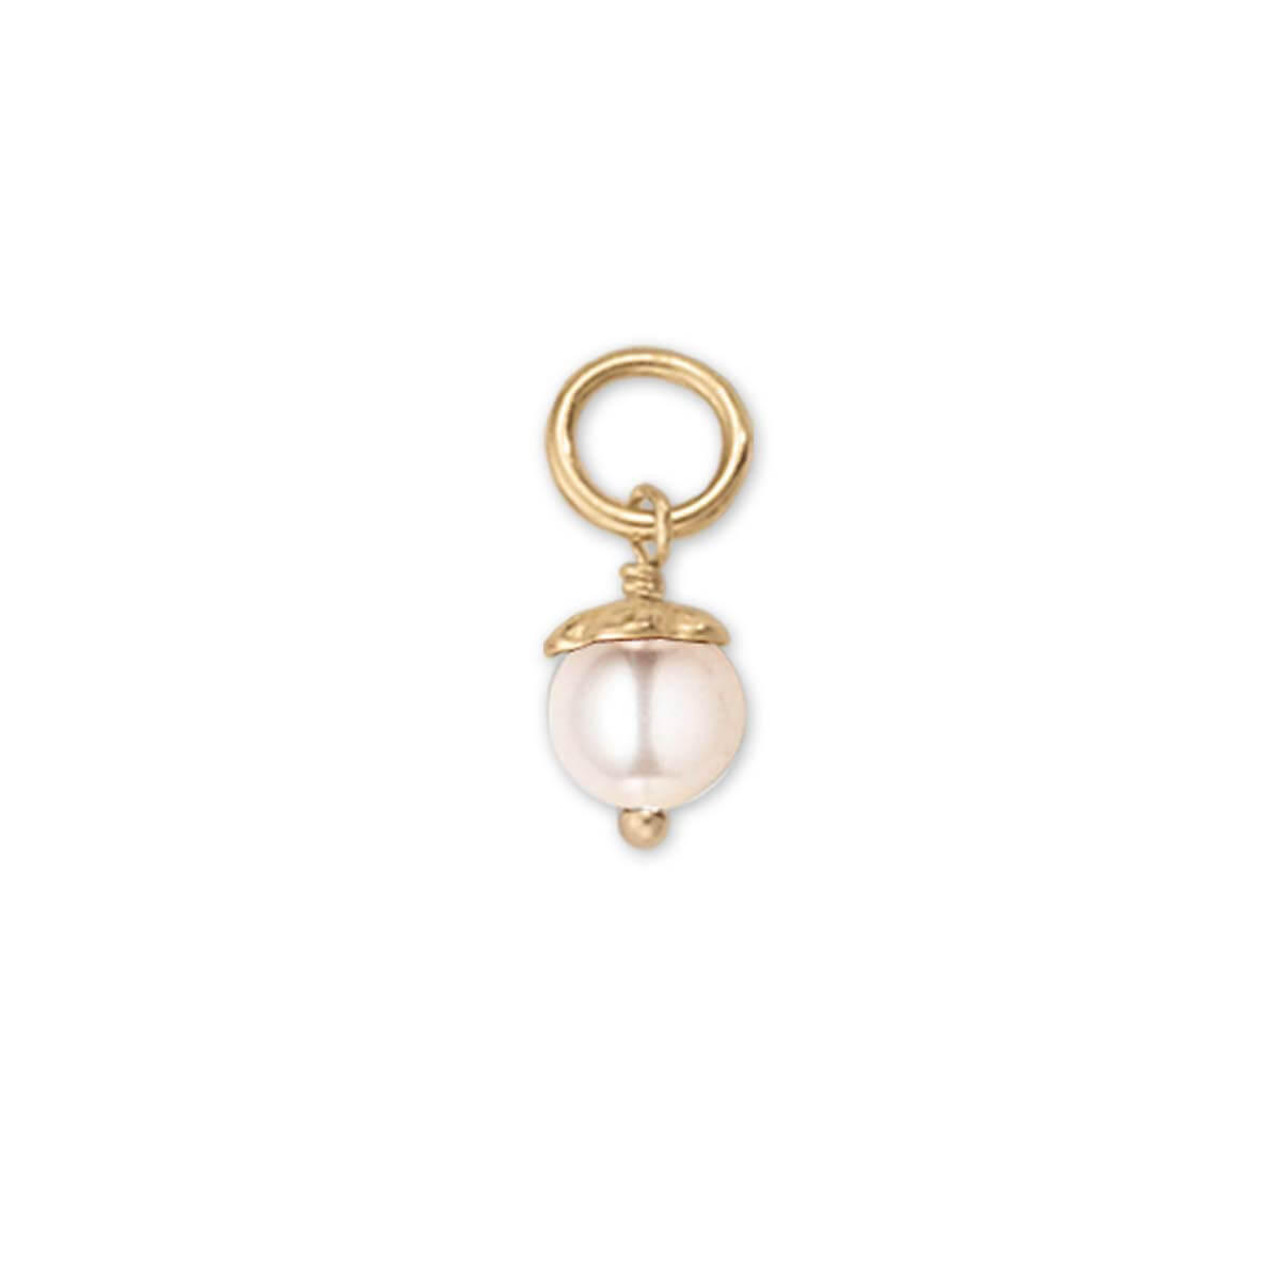 Earring Charms - Pearl Charms